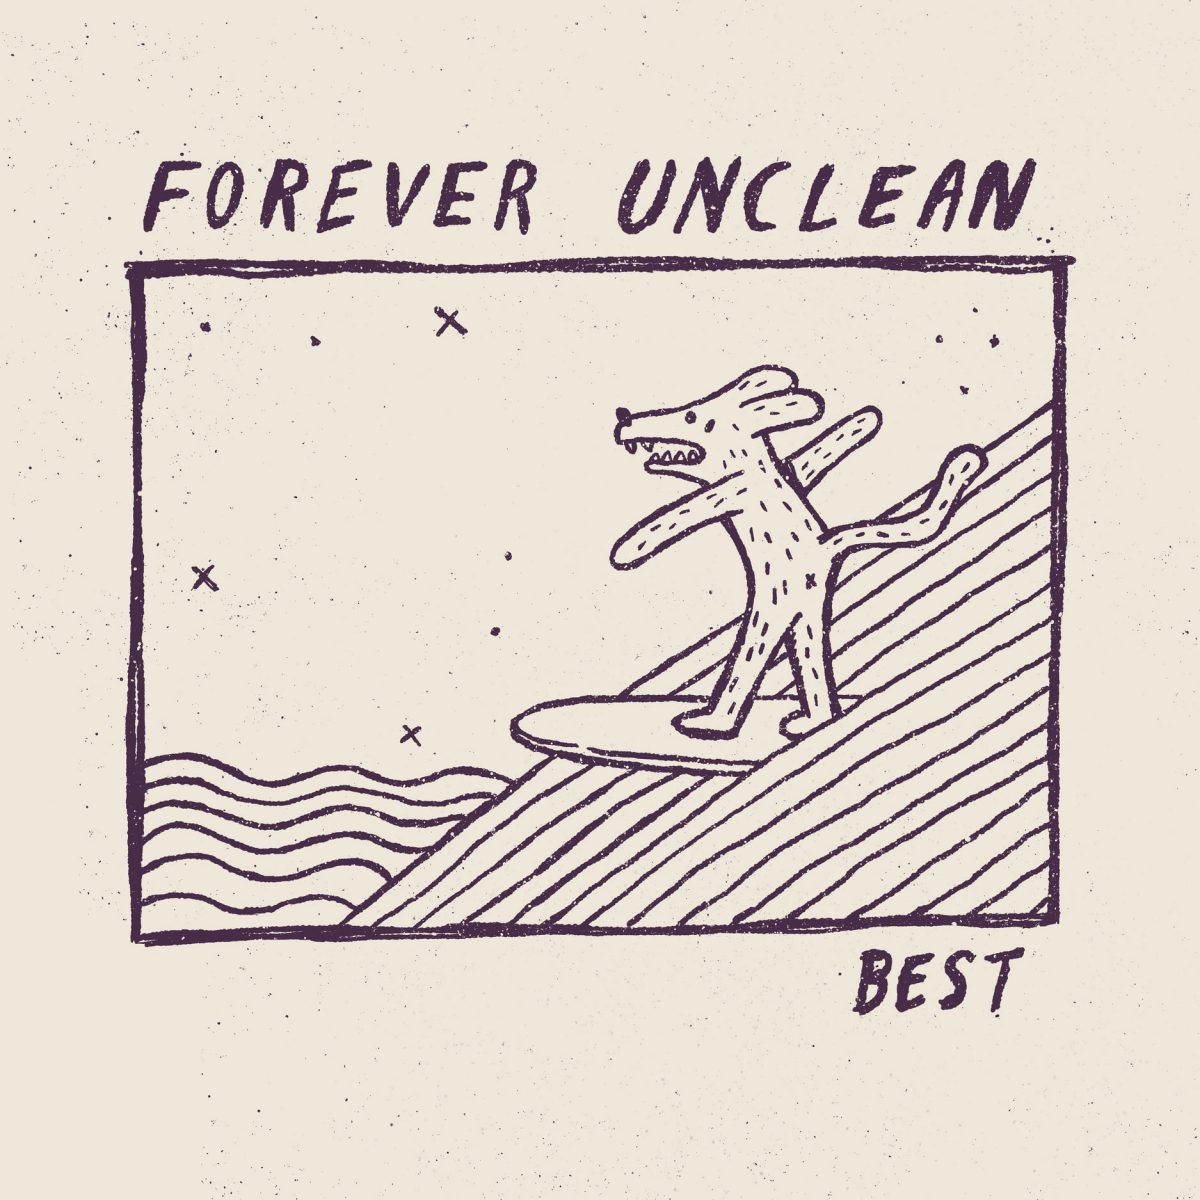 Drinkscussing: Forever Unclean – Best